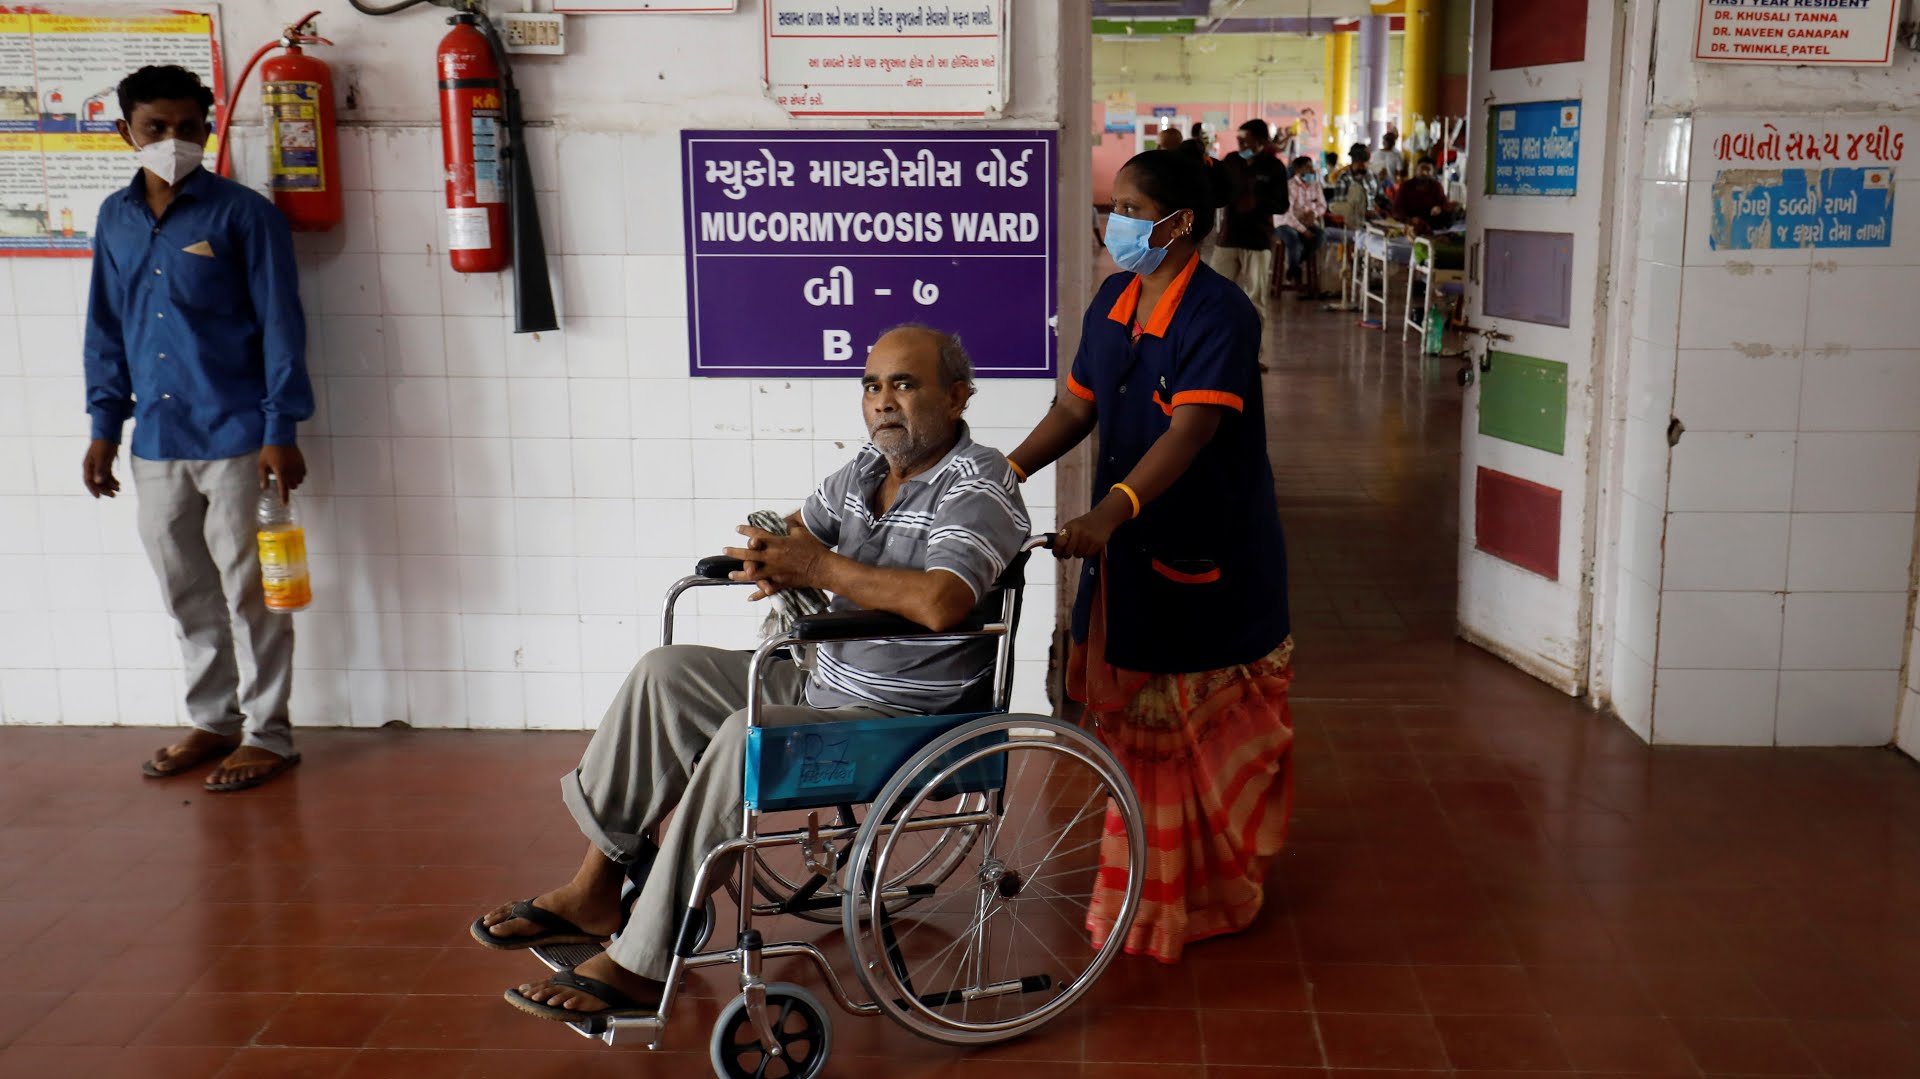 Bhikhabhai Jivrajbhai Jethwa, who was suffering from Mucormycosis, leaves hospital after he was discharged following his mouth surgery, in Ahmedabad